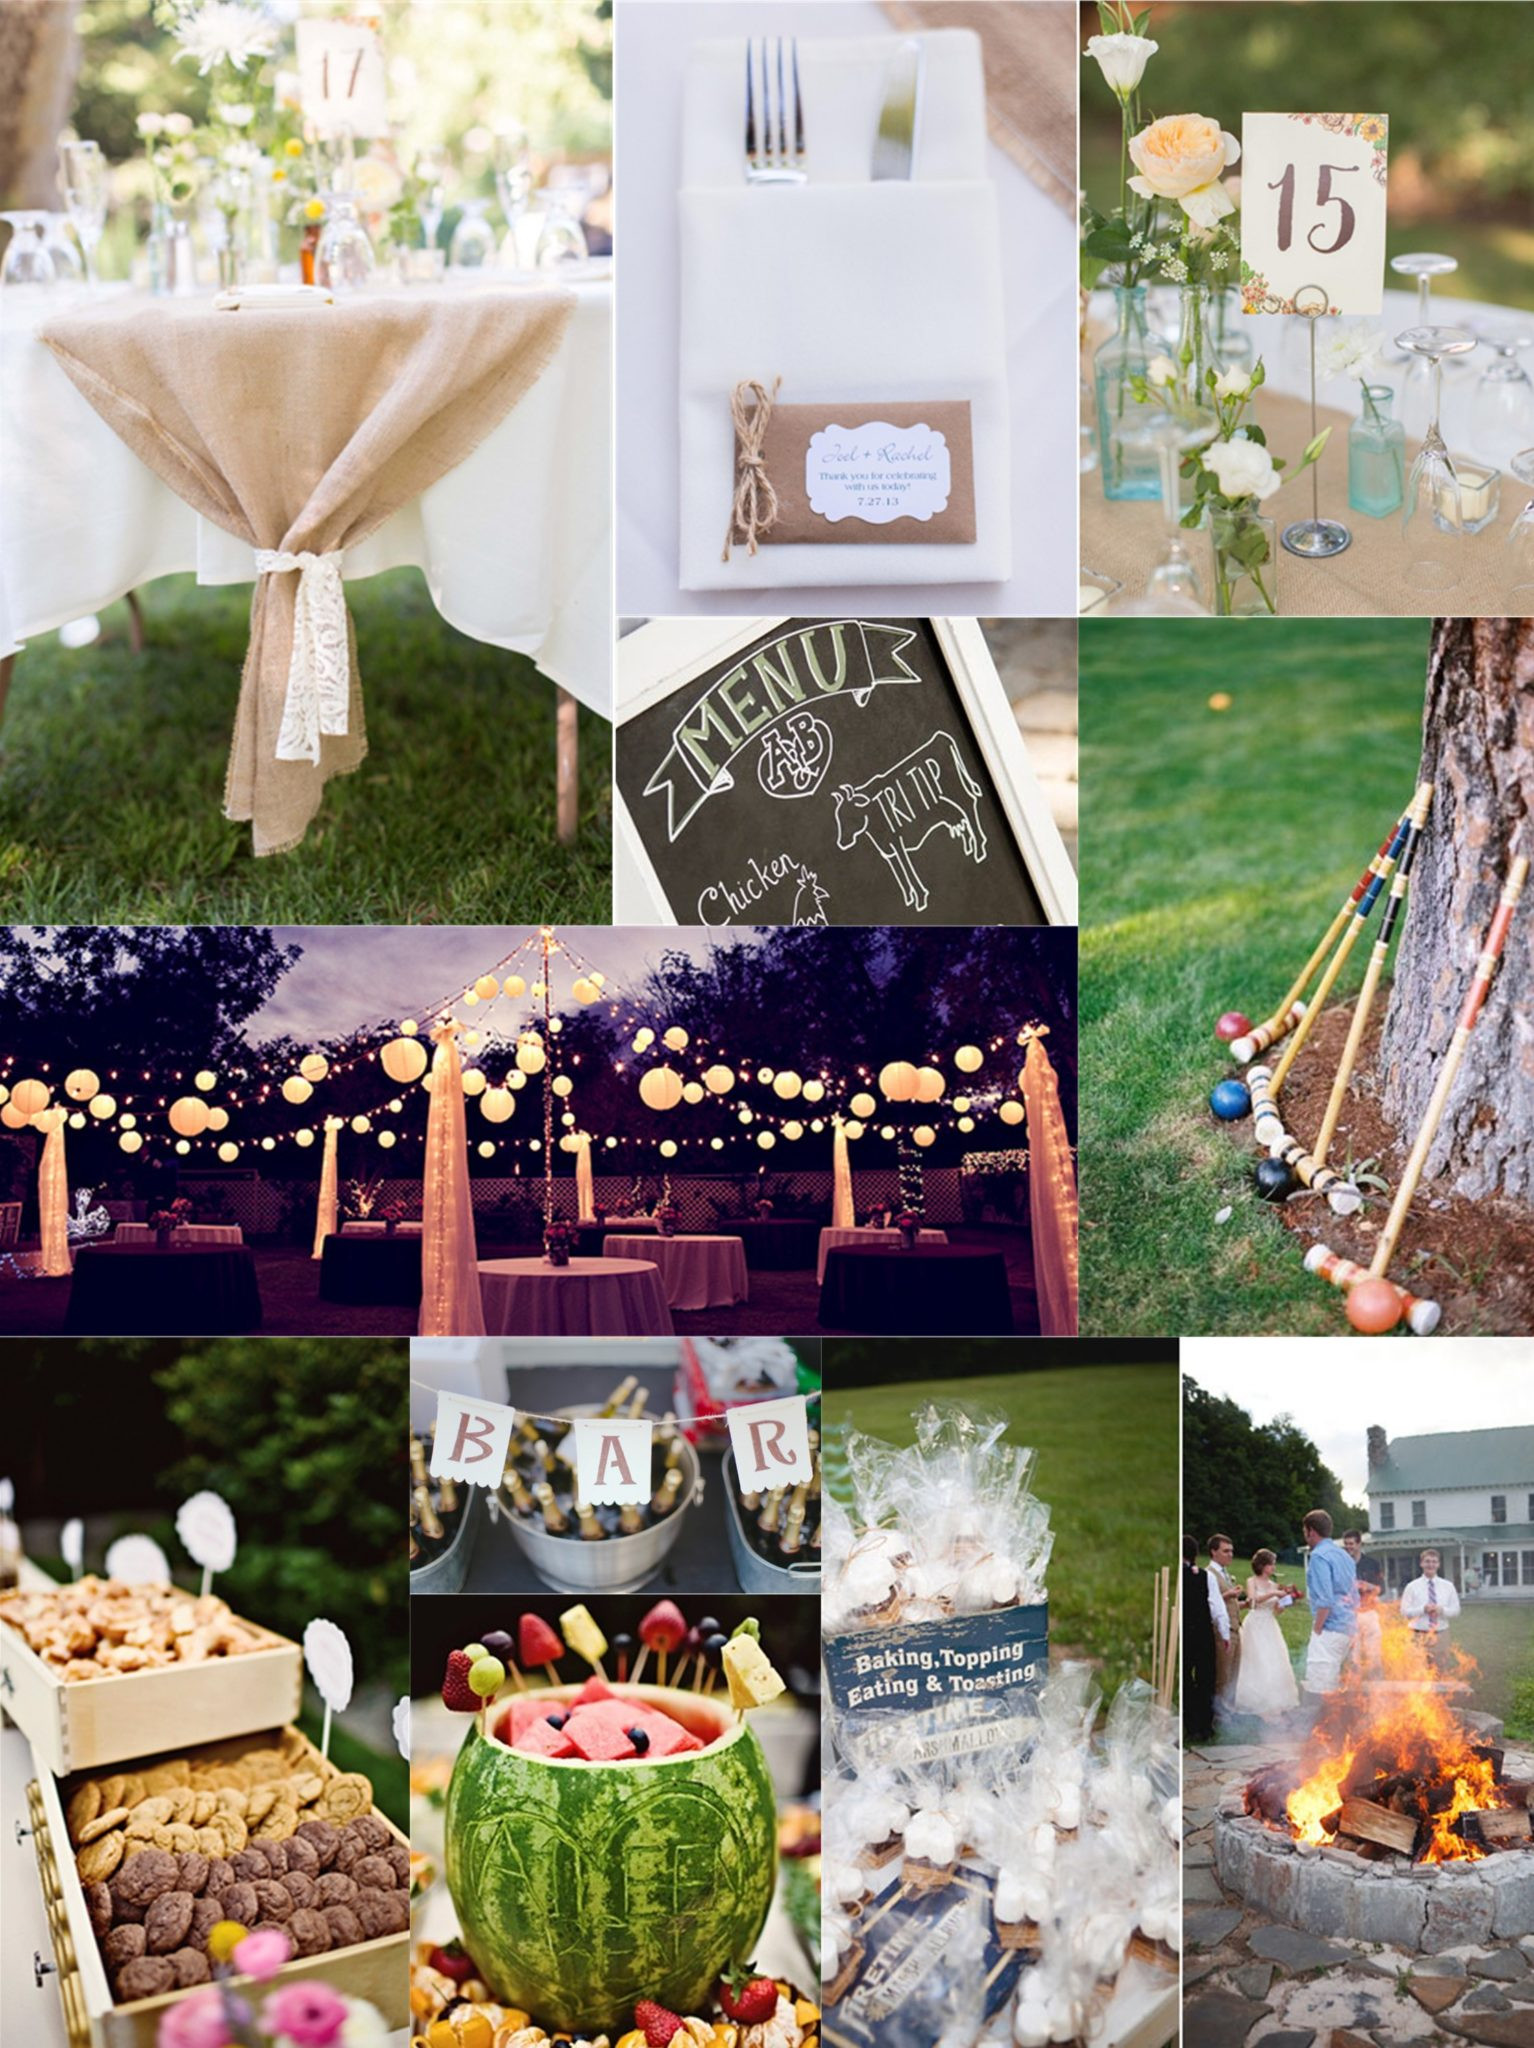 Engagement Party Ideas On A Budget
 Essential Guide to a Backyard Wedding on a Bud